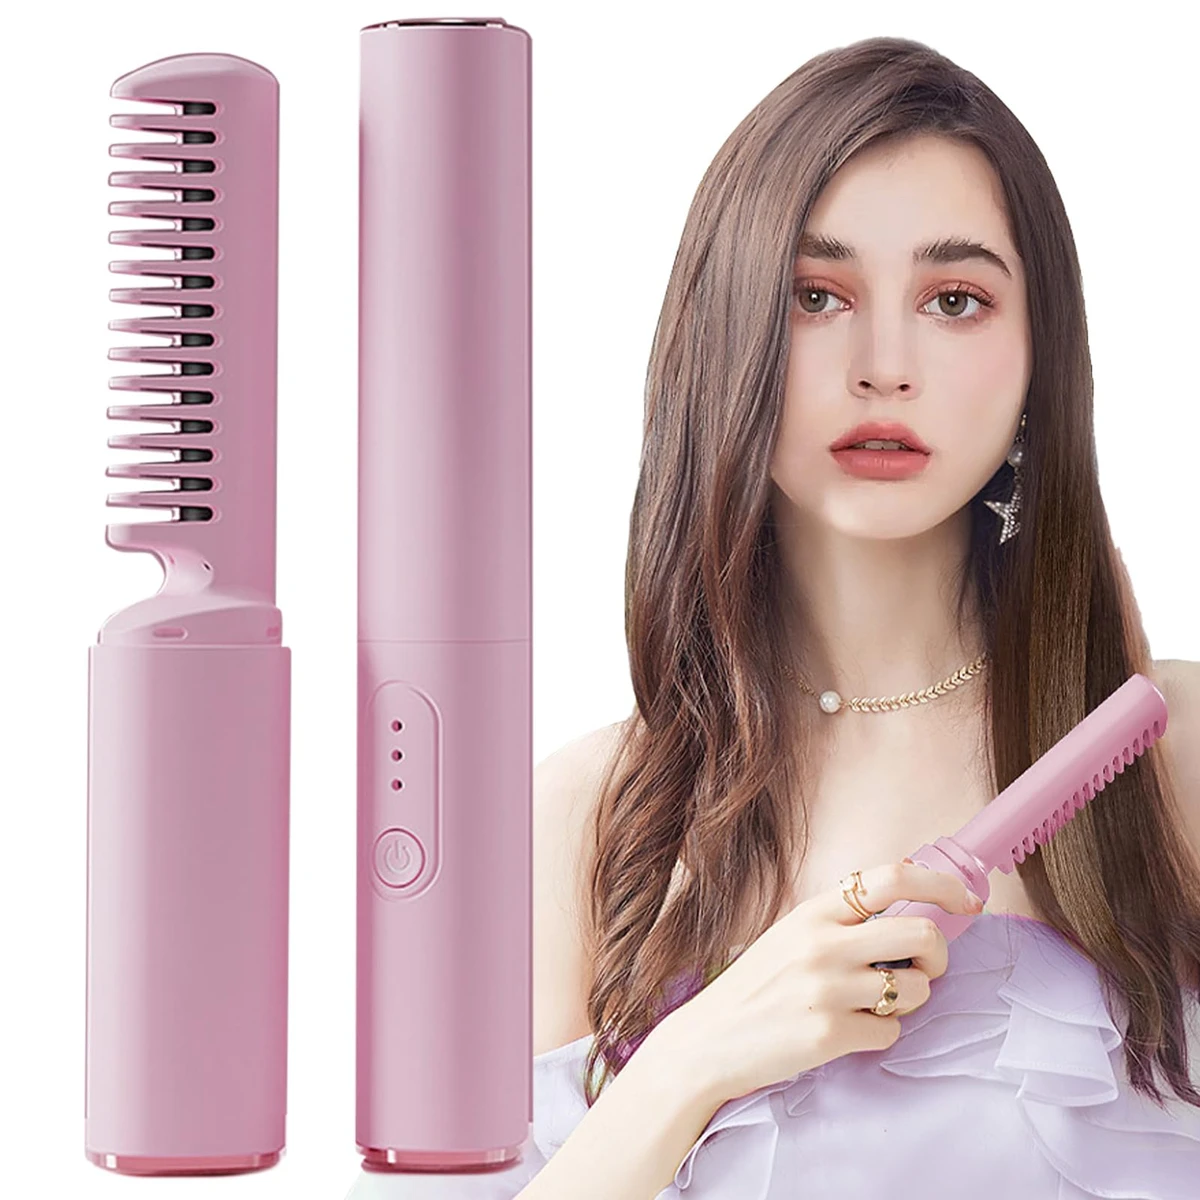 2-in-1 Mini Portable Wireless Straight Hair Comb for Curly Hair & Beard